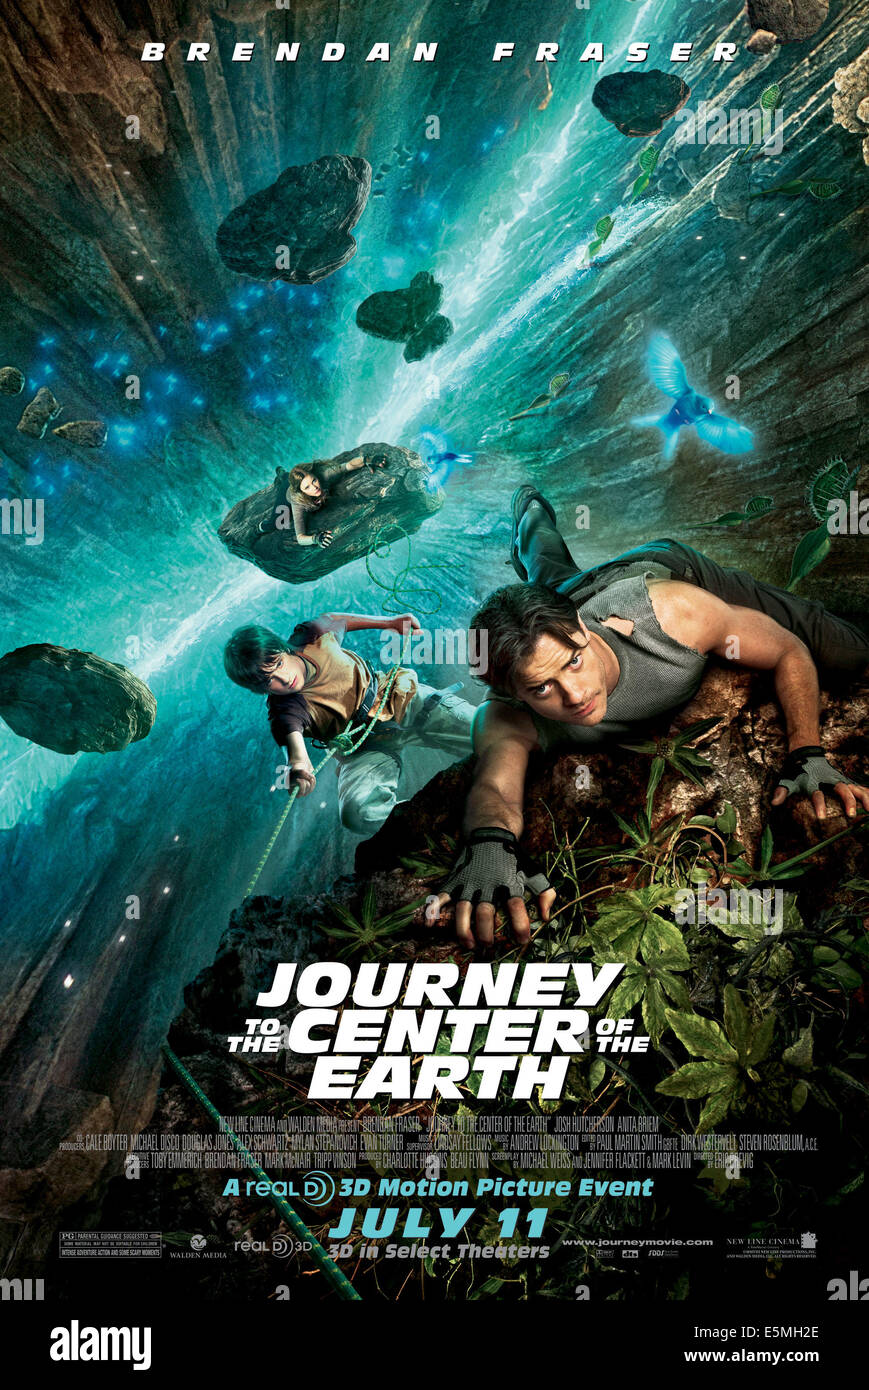 JOURNEY 3-D, (aka JOURNEY TO THE CENTER OF THE EARTH 3D), back to front: Anita Briem, Josh Hutcherson, Brendan Fraser, 2008. Stock Photo